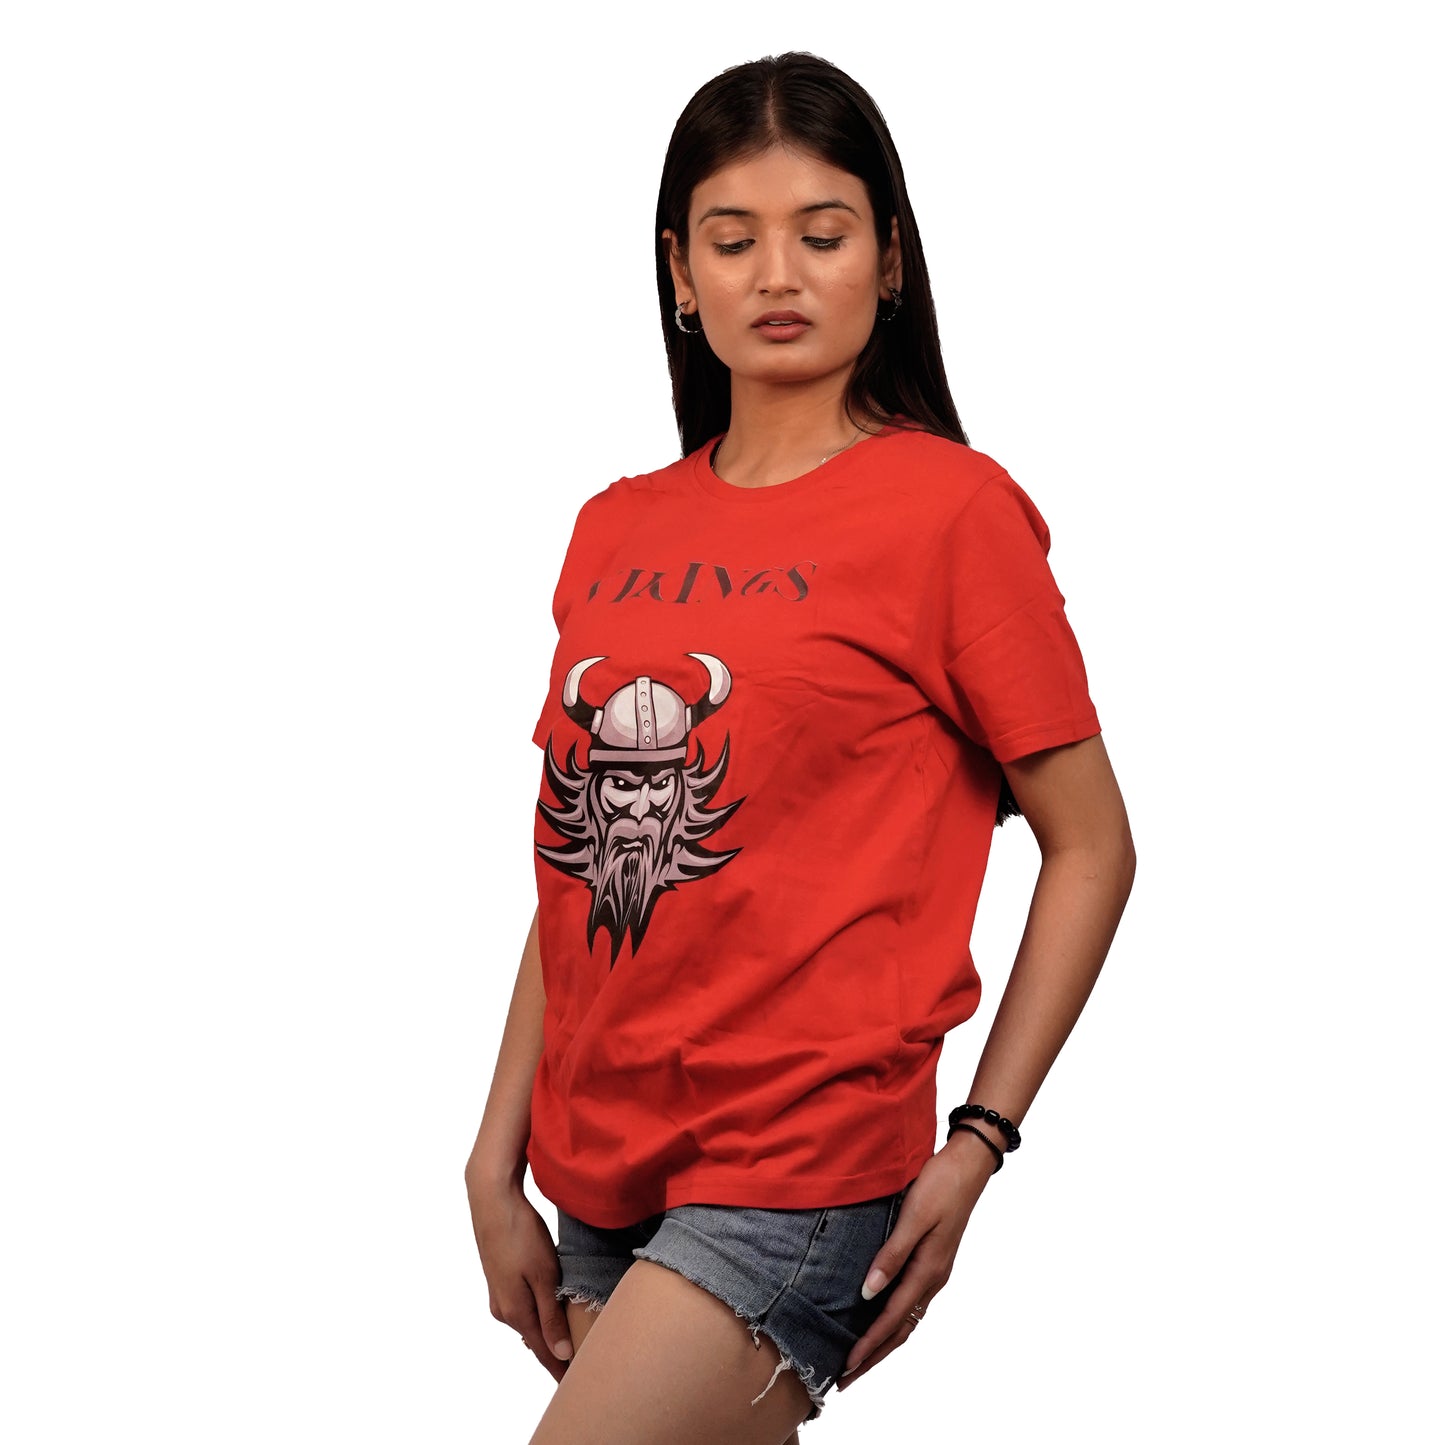 Viking T-shirt In Red Color For Women